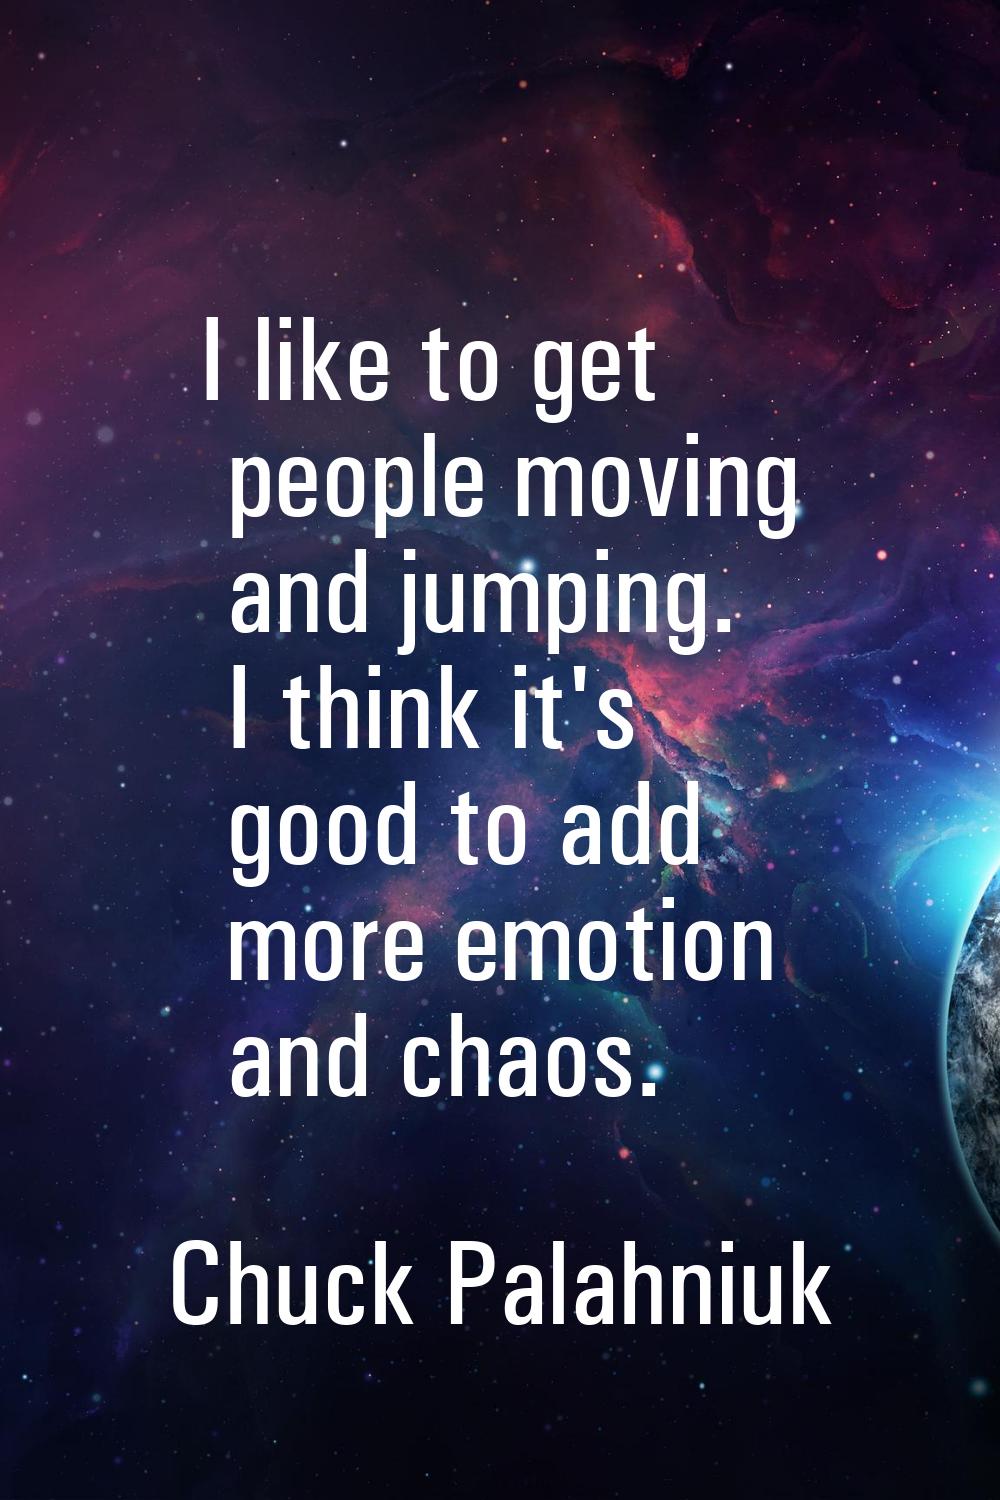 I like to get people moving and jumping. I think it's good to add more emotion and chaos.